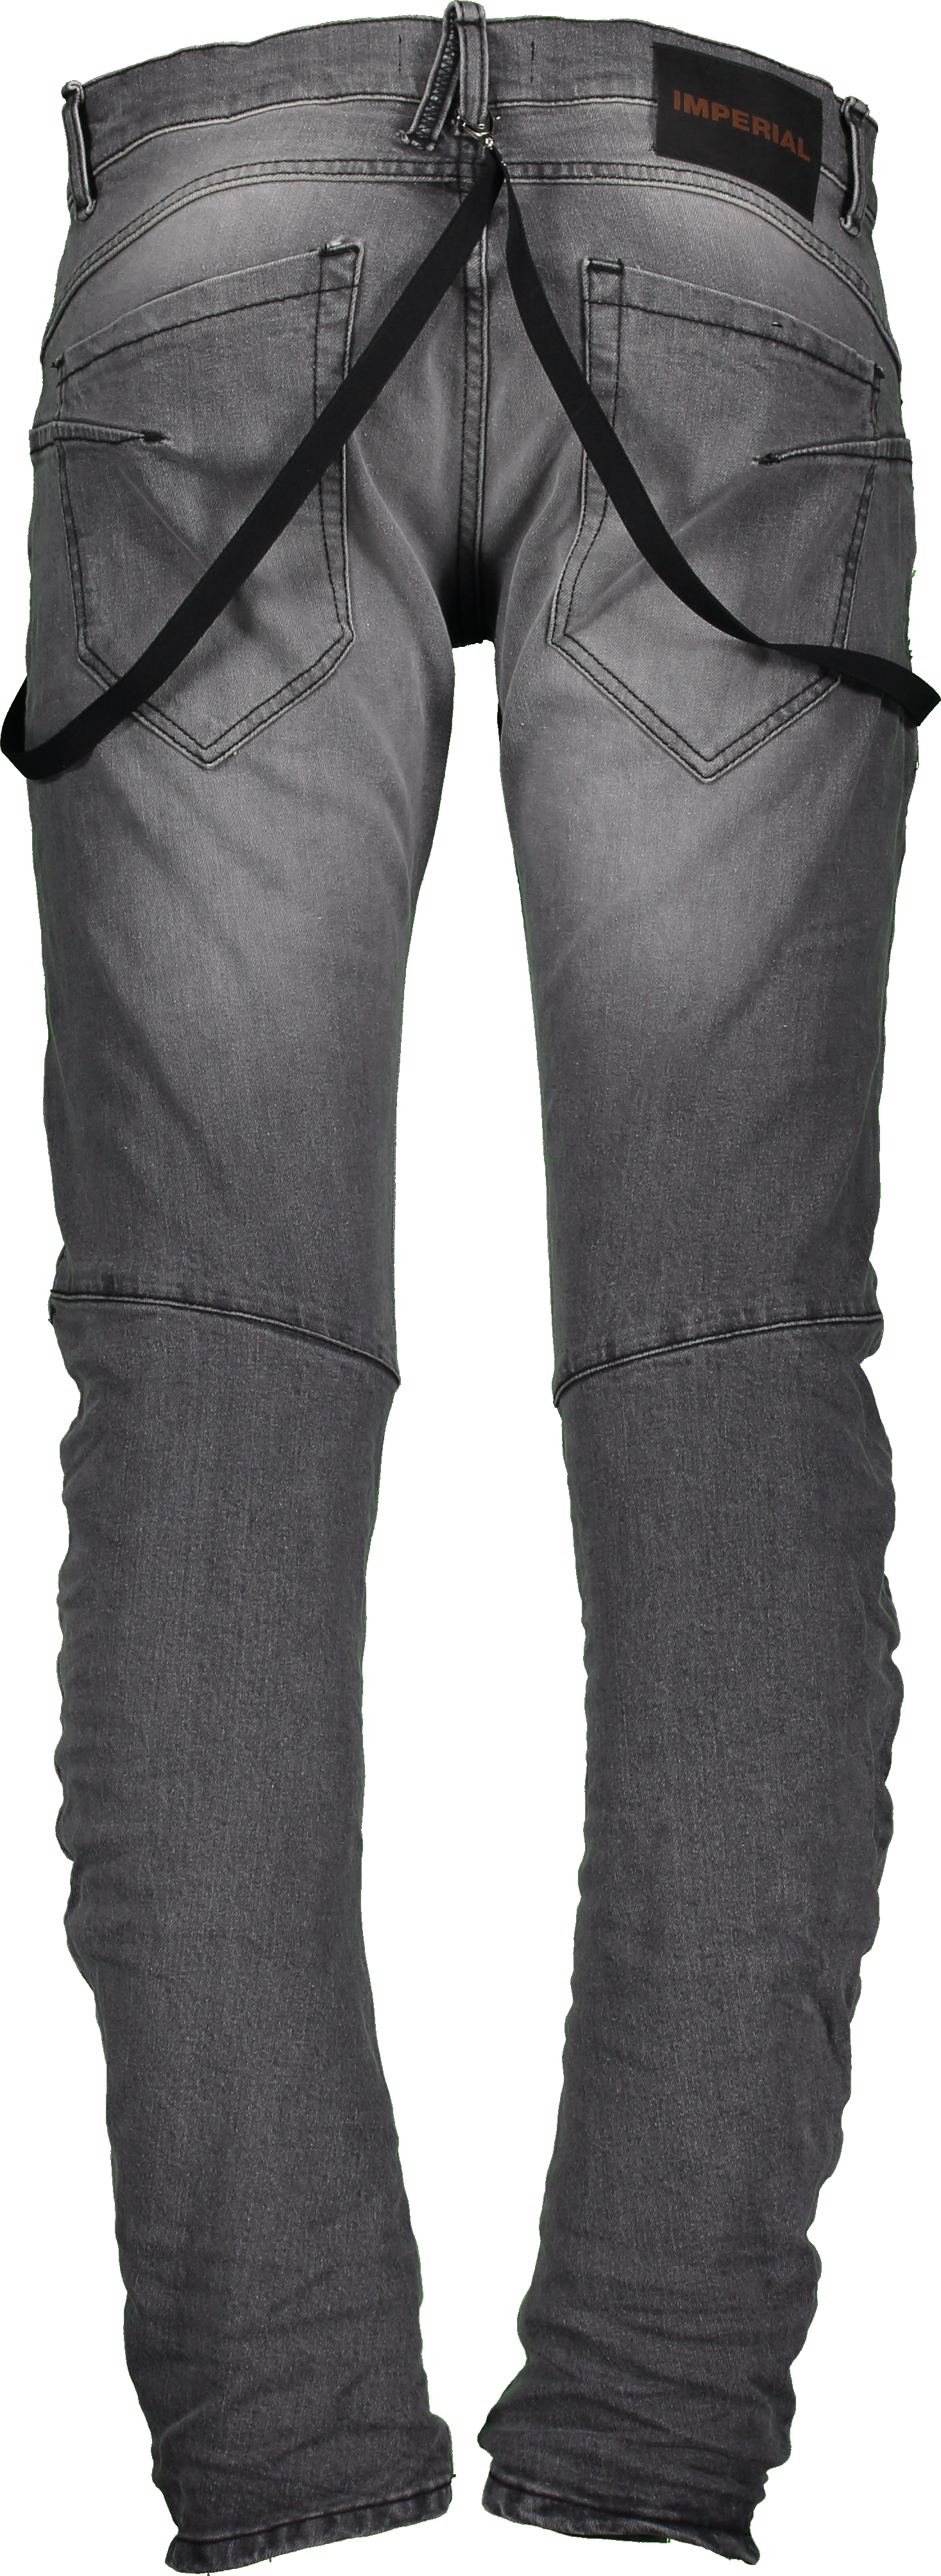 IMPERIAL JEANS BARK P372MBKD78